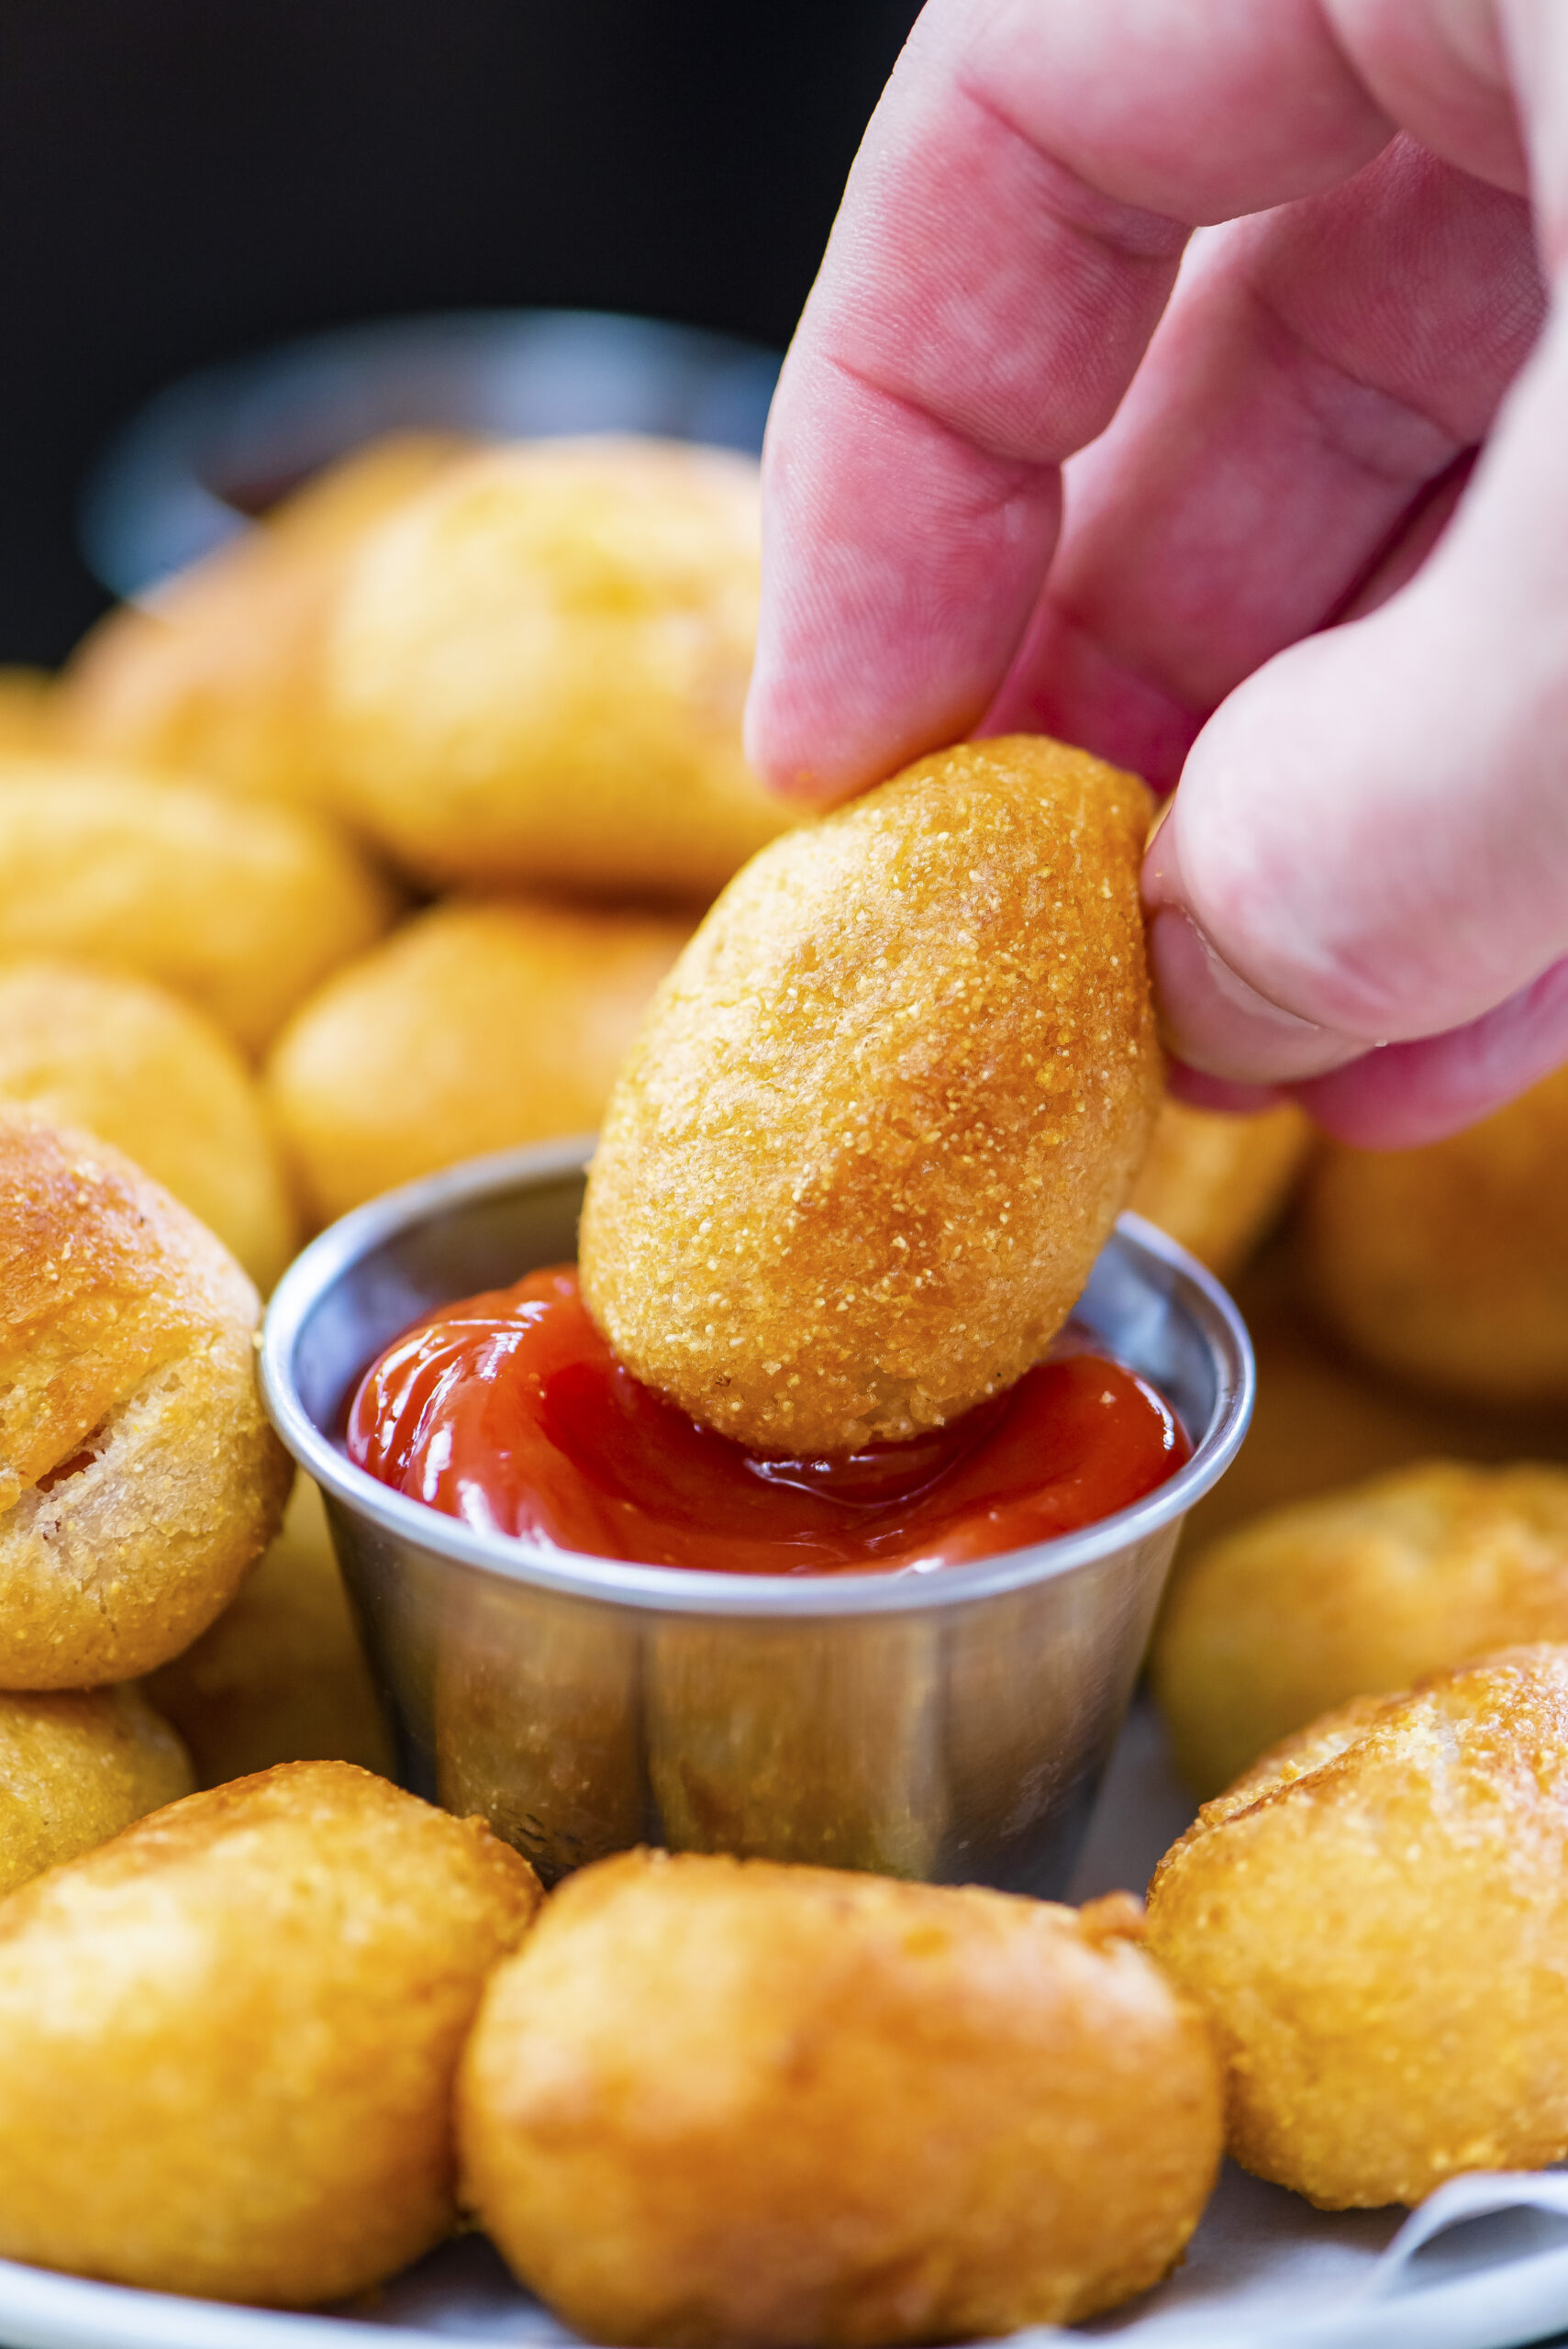 Hand dipping a mini corn dog in ketchup.